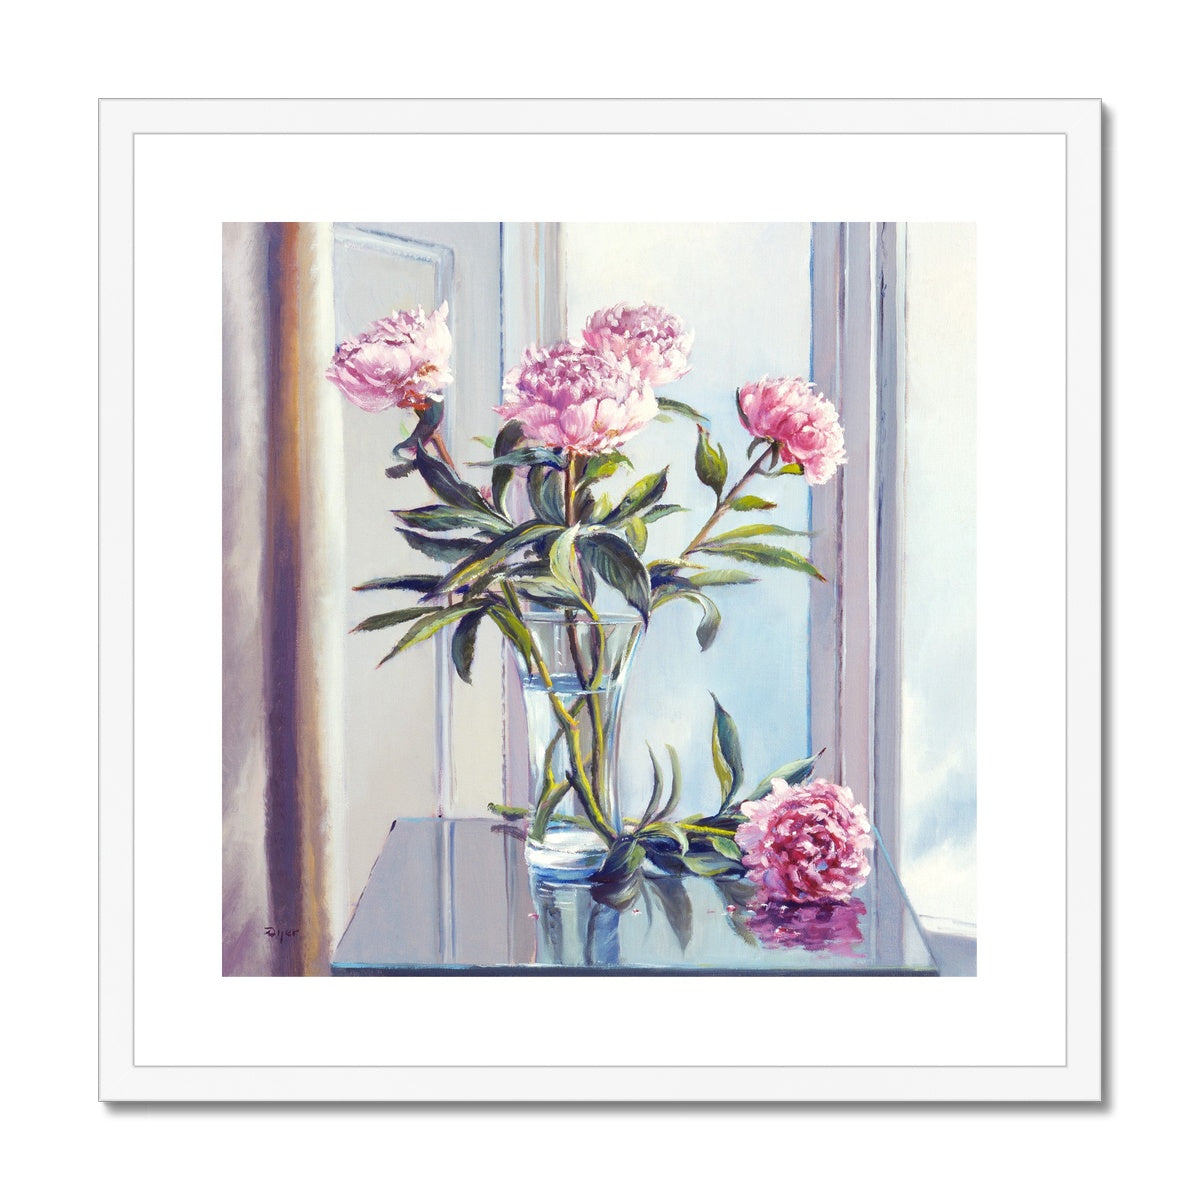 Ted Dyer Framed Open Edition Cornish Fine Art Print. &#39;Pink Peonies&#39;. Cornwall Art Gallery